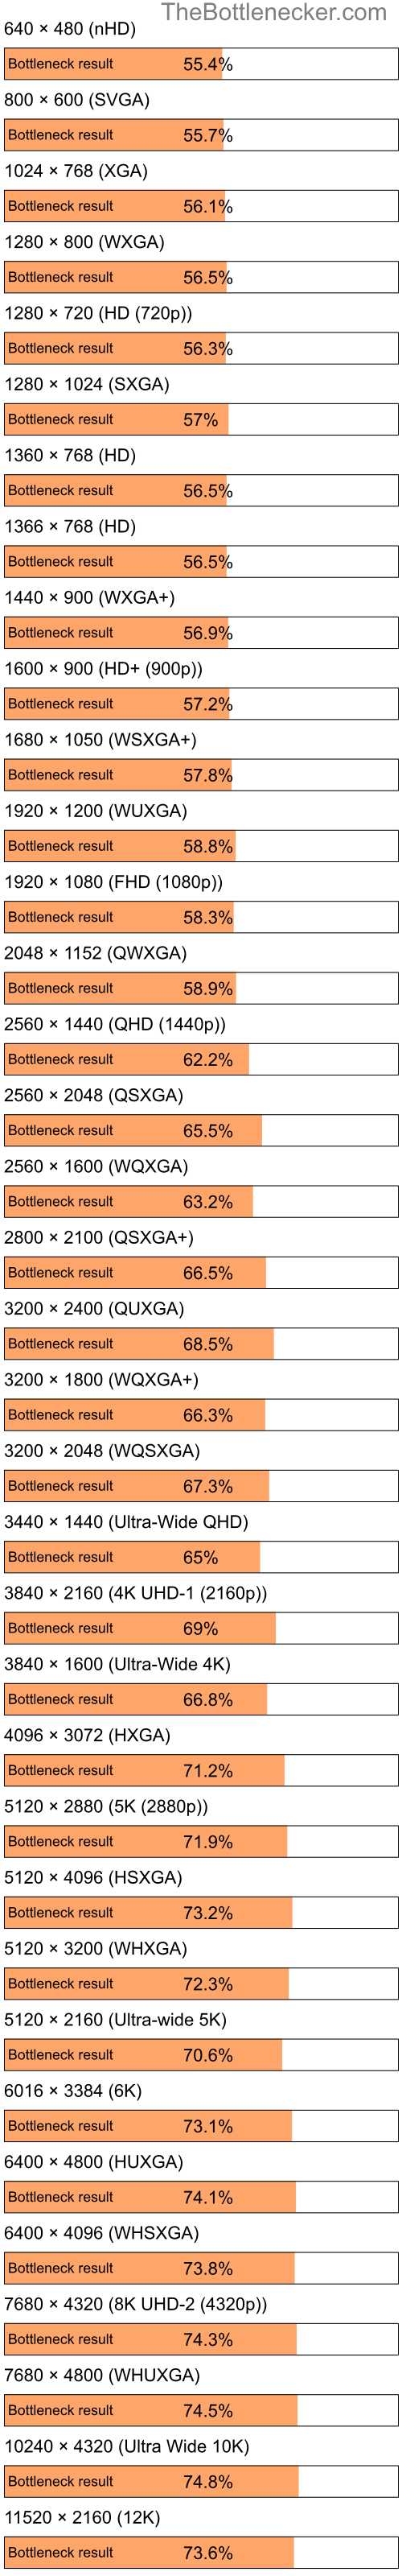 Bottleneck results by resolution for Intel Pentium 4 and AMD Mobility Radeon HD 3430 in Processor Intense Tasks